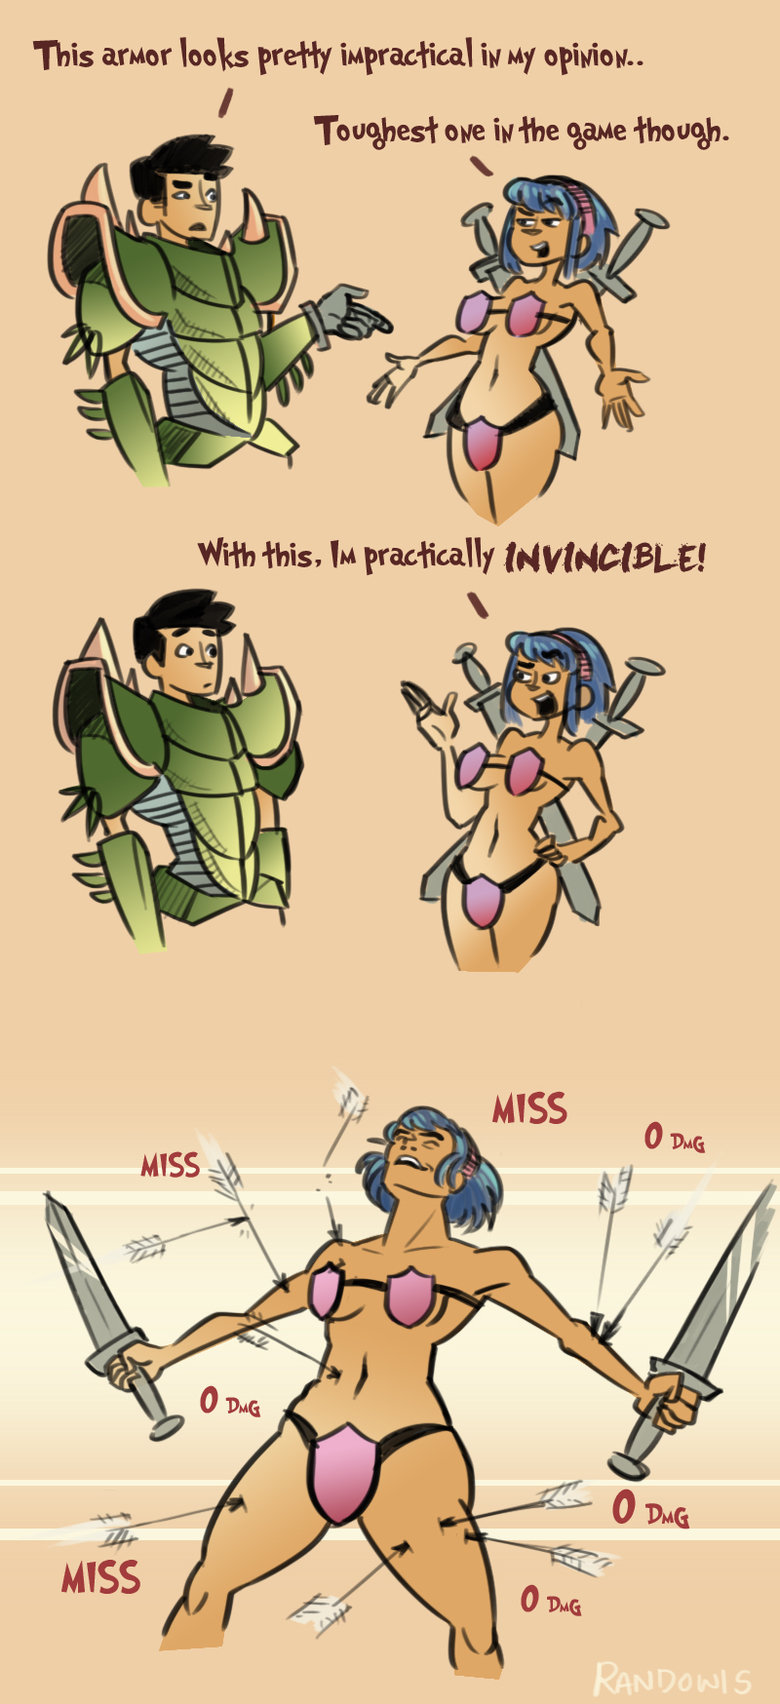 female armor comic - This armor looks pretty impractical in my opinion.. 3 Toughest one in the game though. With this, I practically Invincible! Miss Miss O Dig Missa O Dng L O Dng Miss O Dng Randowis